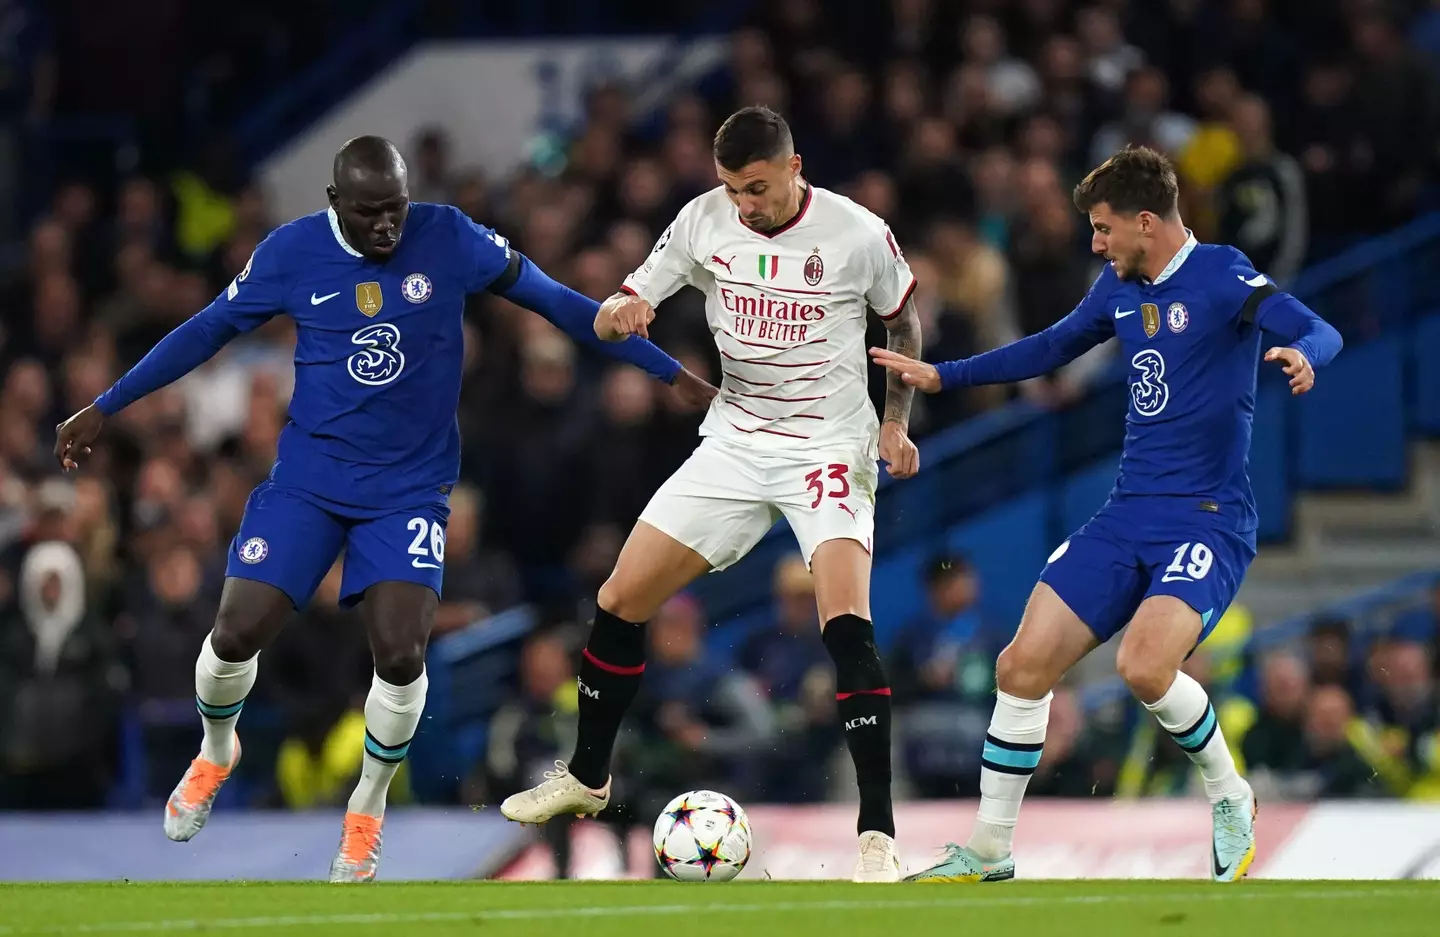 AC Milan's Rade Krunic (centre) battles with Chelsea's Kalidou Koulibaly (left) and Mason Mount during the UEFA Champions League Group E match at Stamford Bridge. (Alamy)